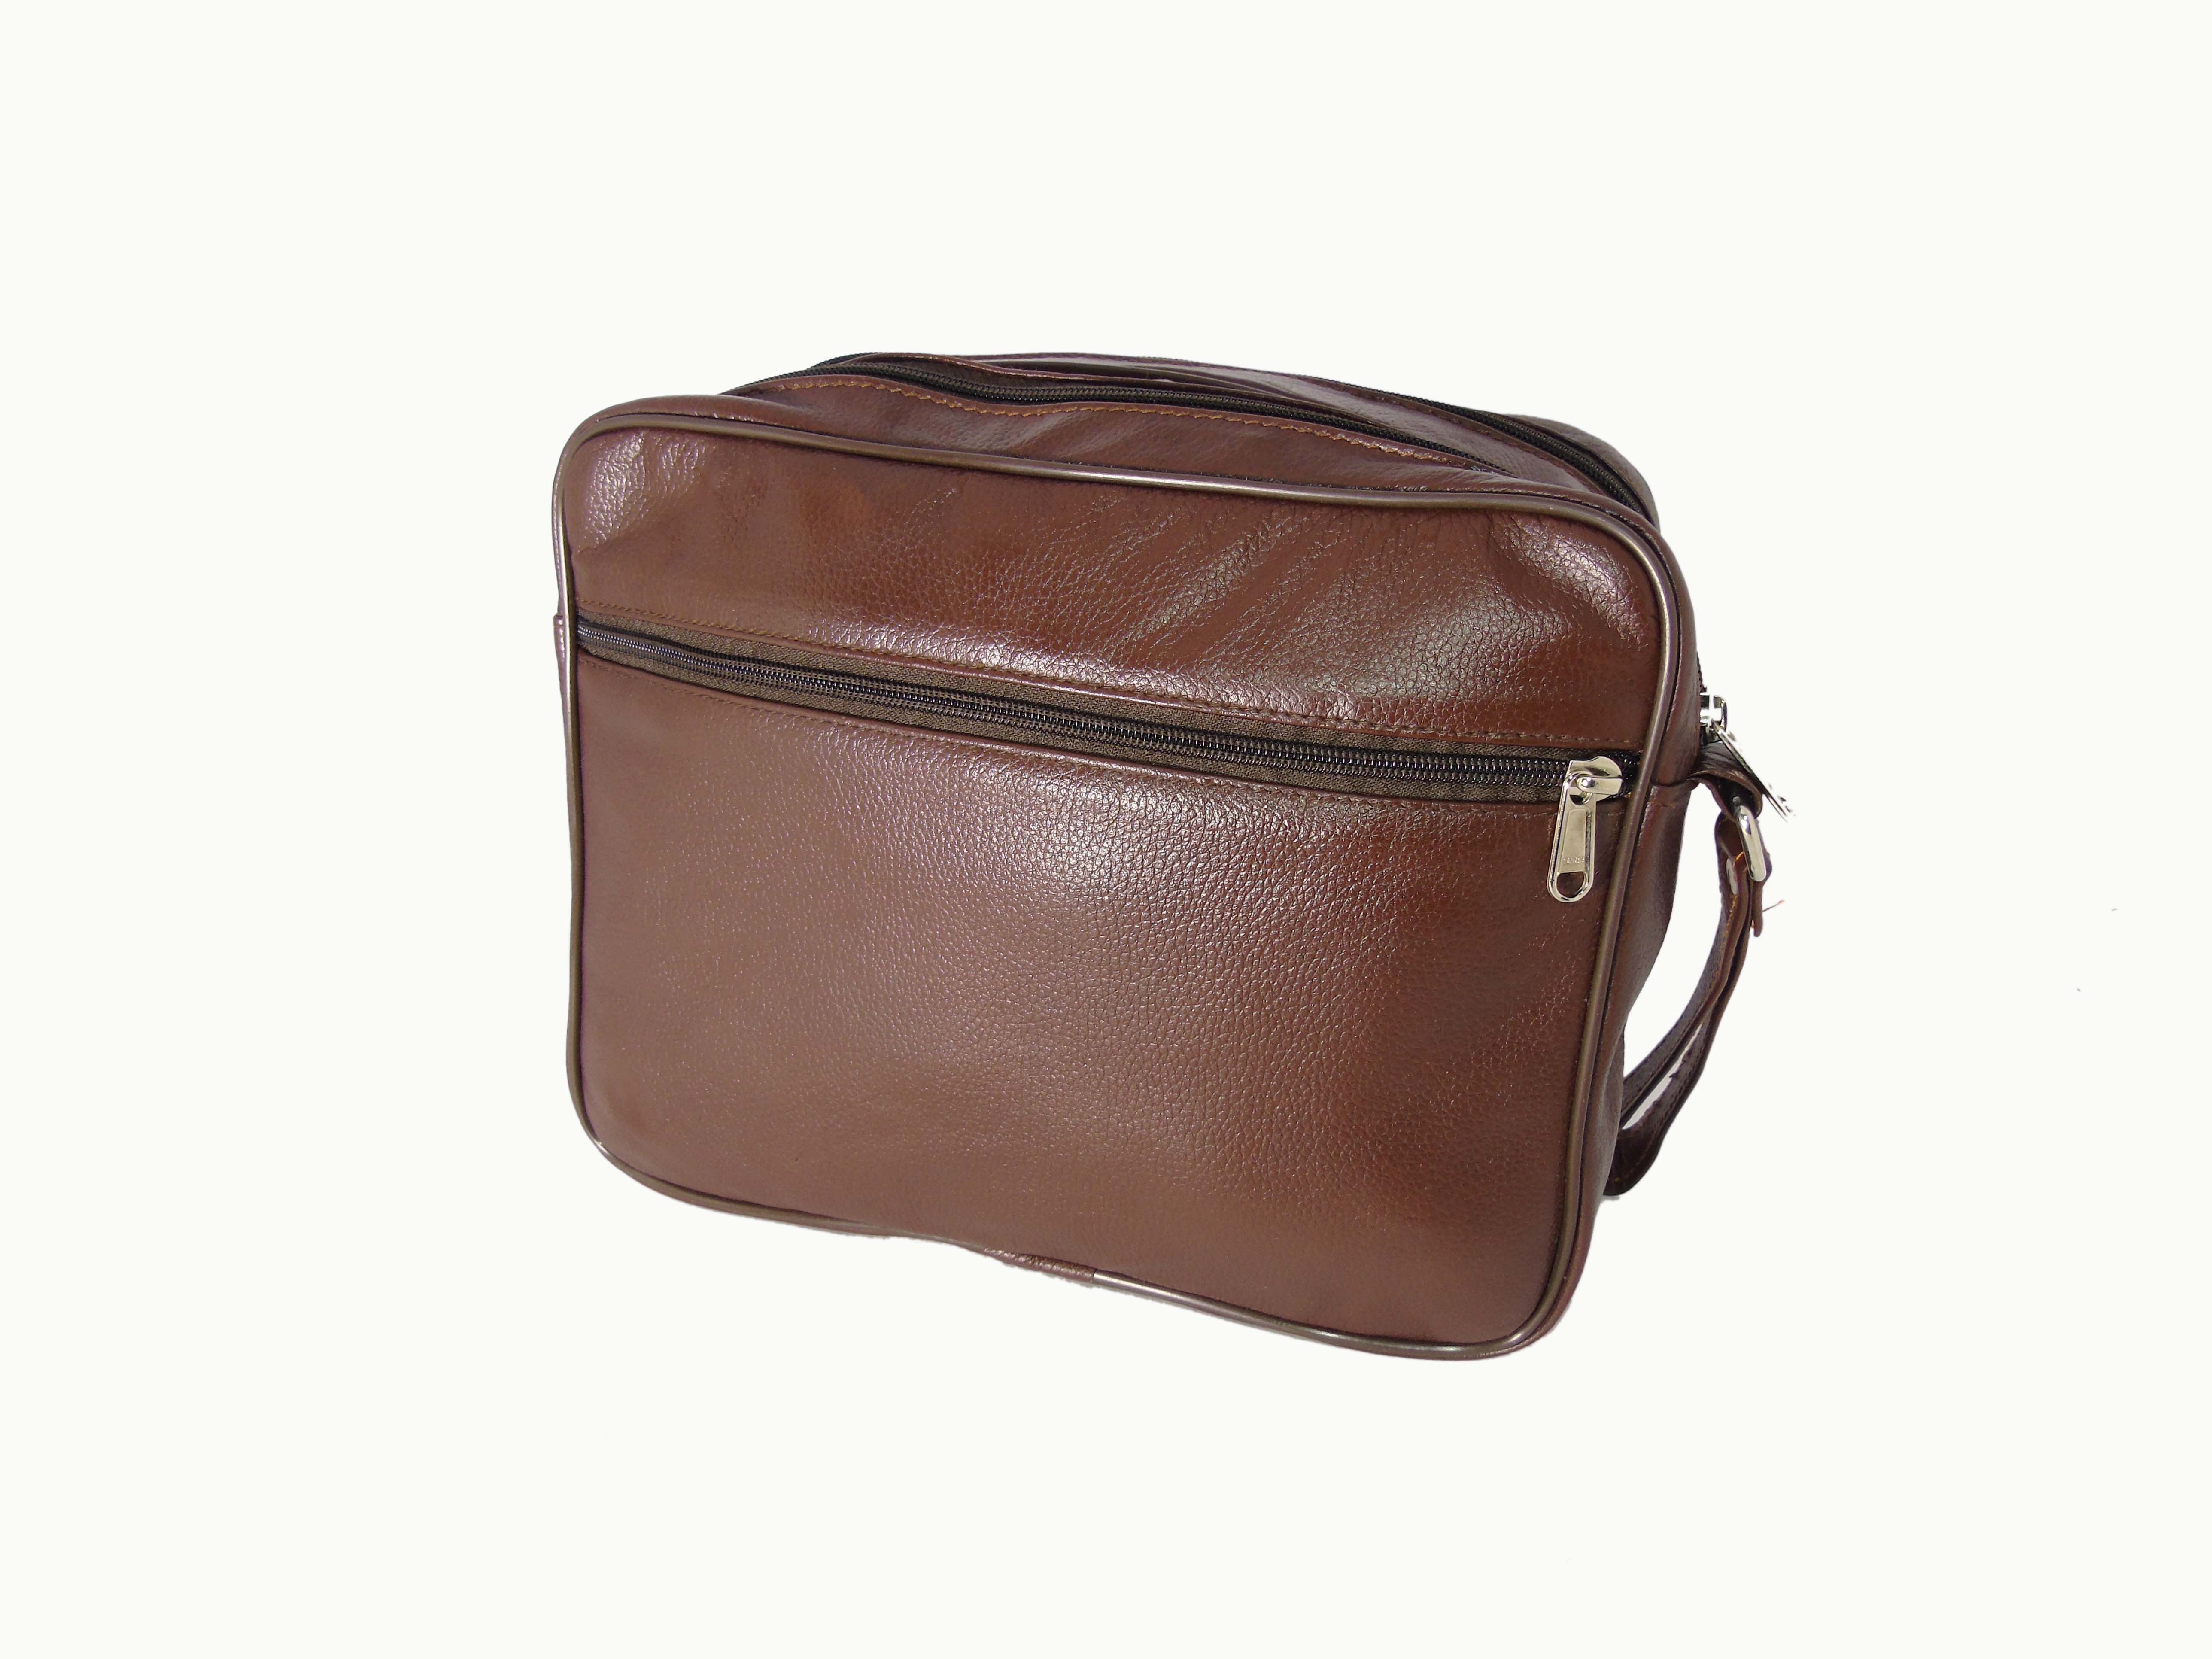 ADPAAR Leather Brown Pouch - Buy ADPAAR Leather Brown Pouch Online at ...